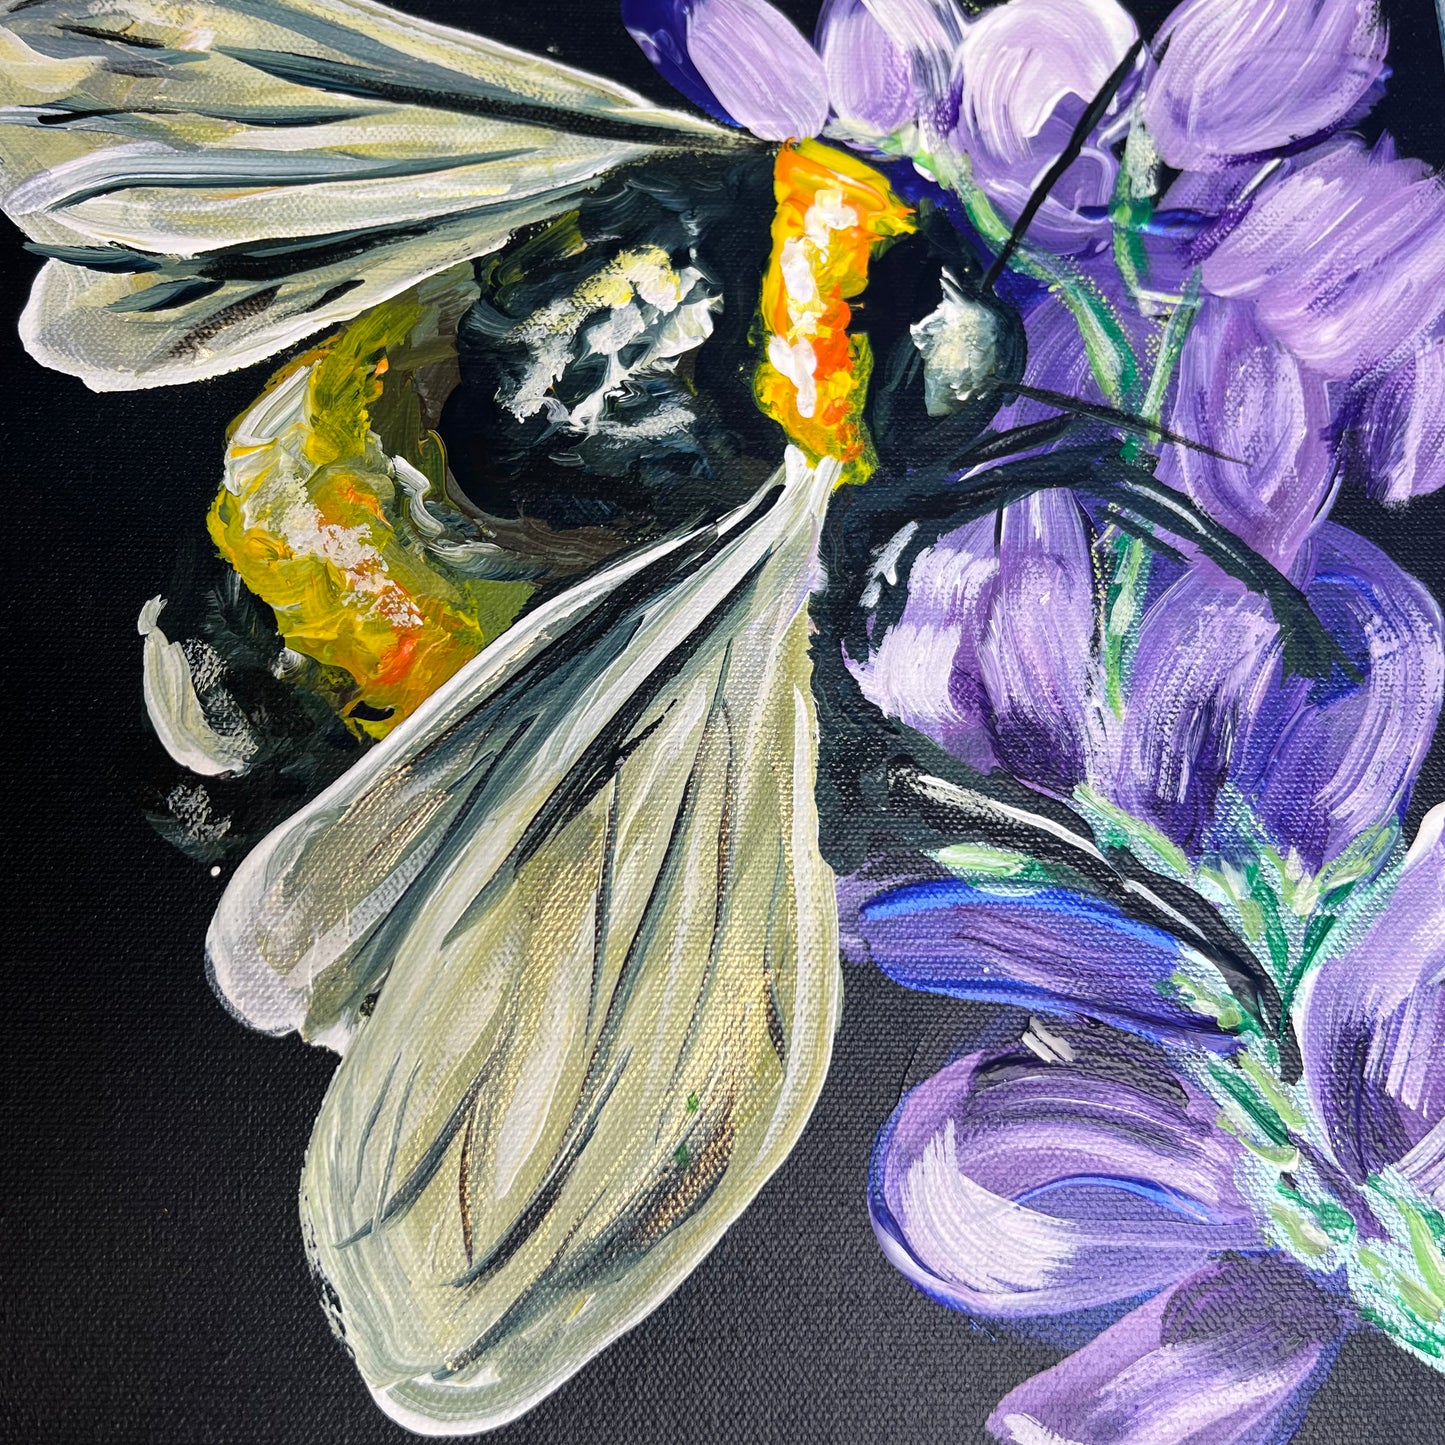 Nectar Delight, small lavender bees 12x12”